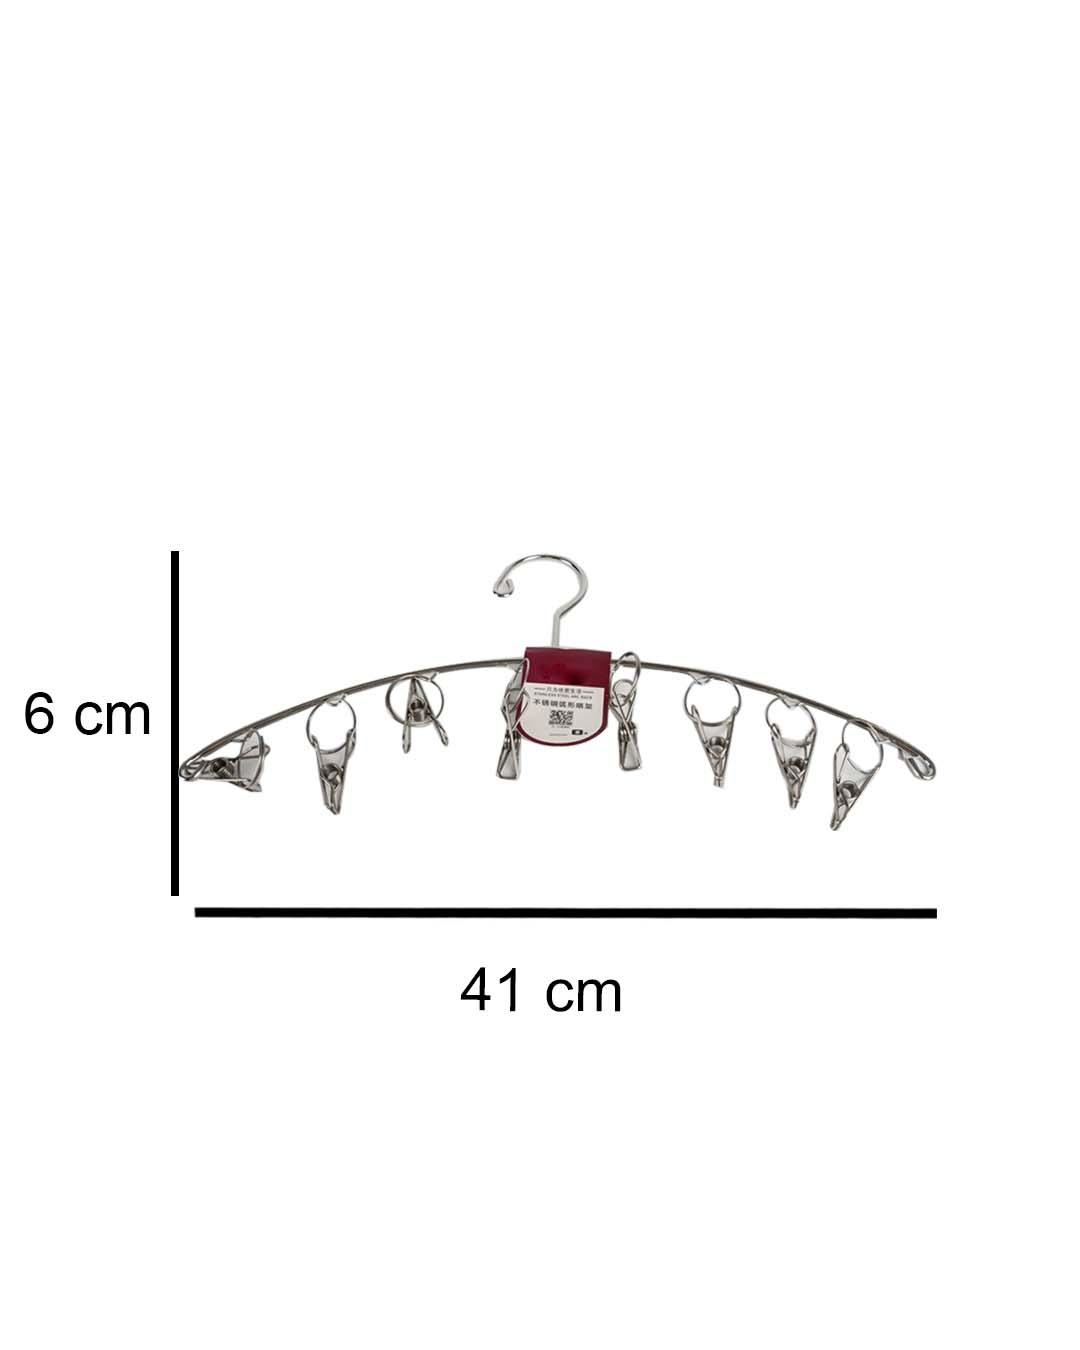 Multi-Purpose Hanger with 8 Clips, Silver, Iron - MARKET 99